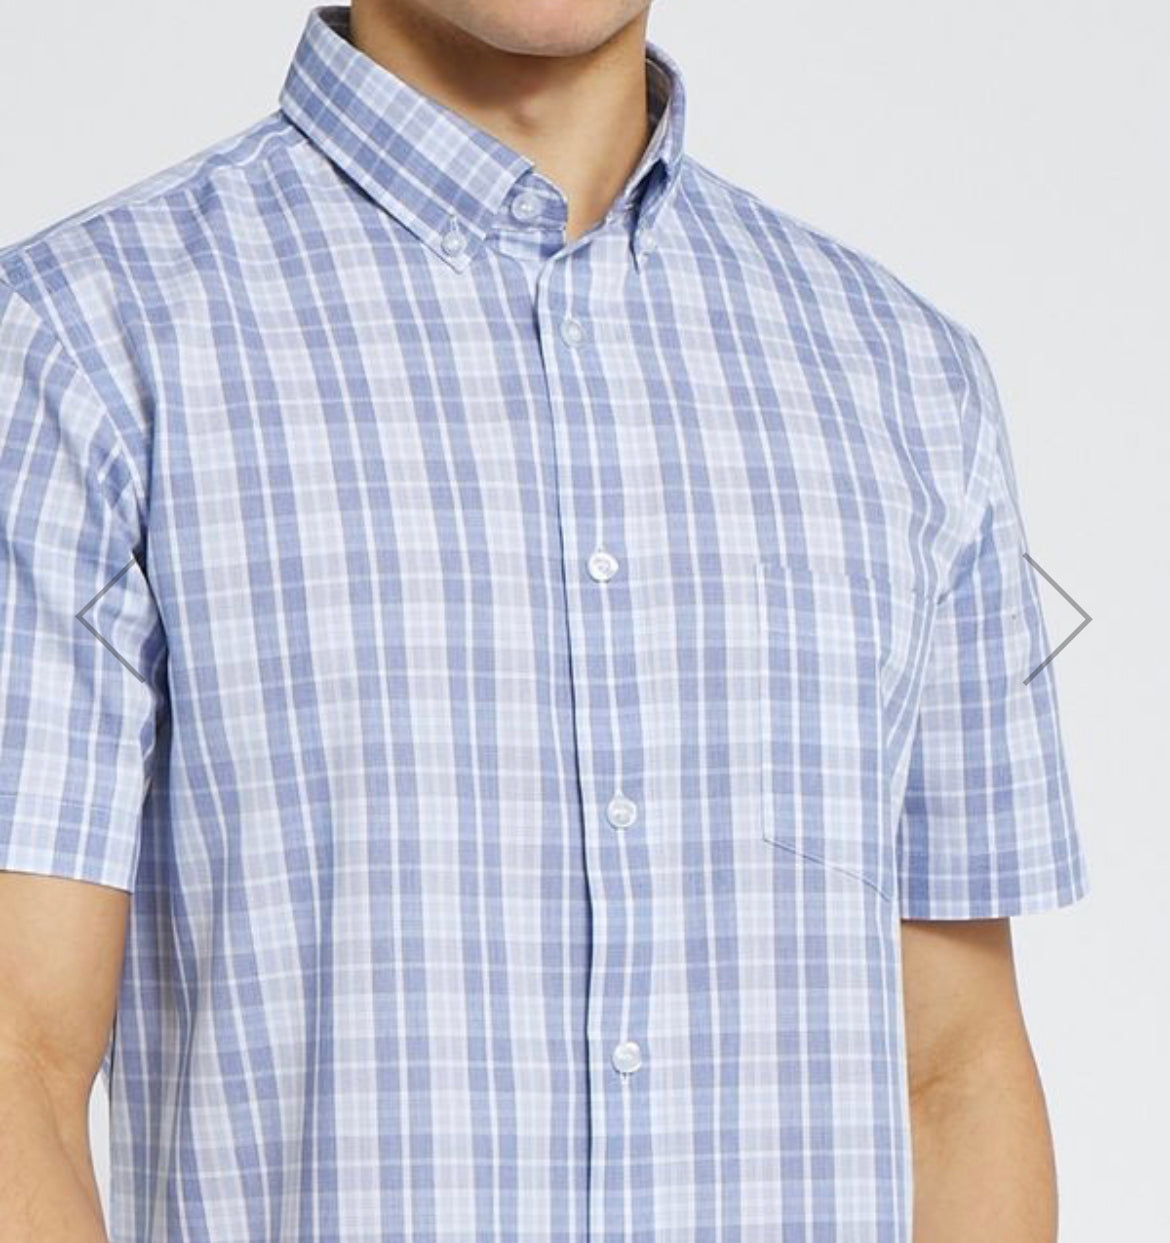 Blue check snappers shirt